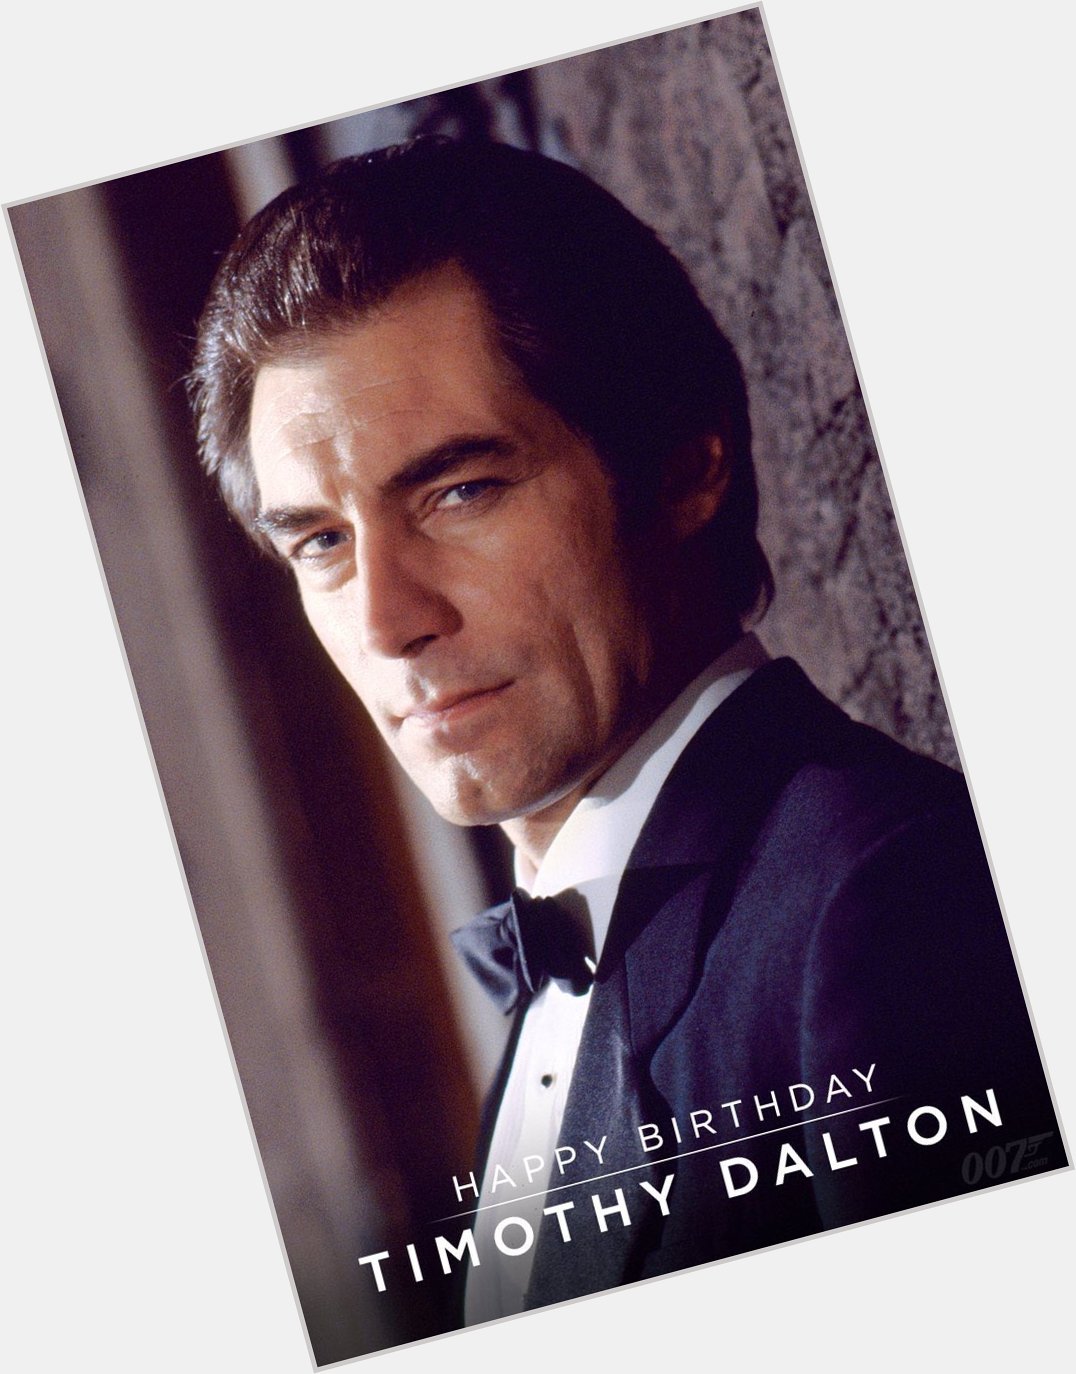 Happy Birthday to former actor, and fellow Welshman, Timothy Dalton!  